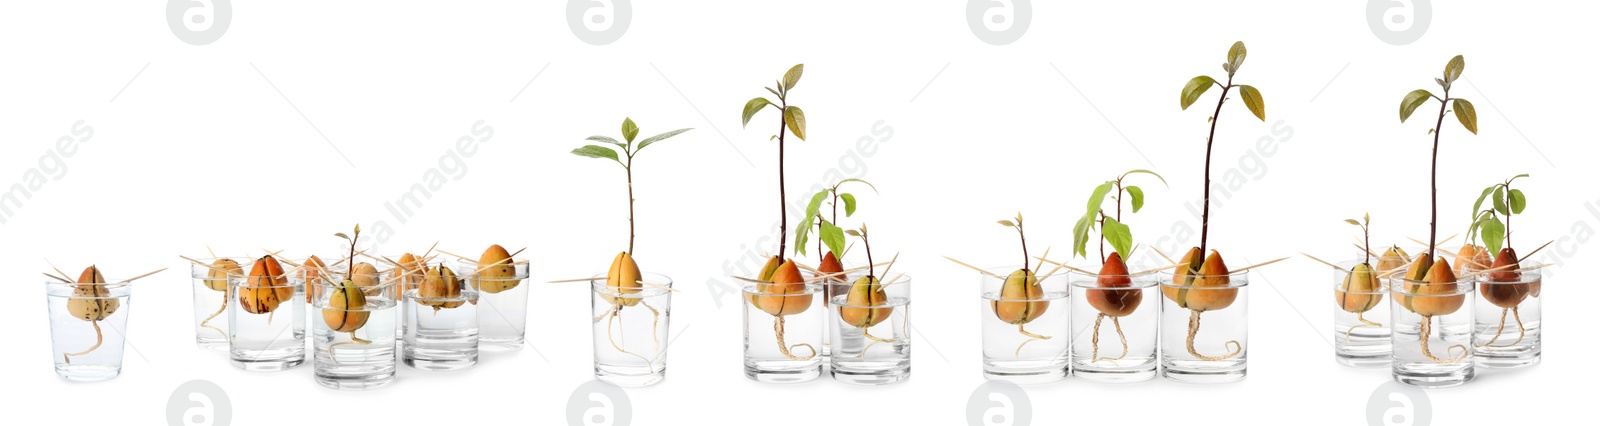 Image of Set of avocado pits with sprouts on white background, banner design